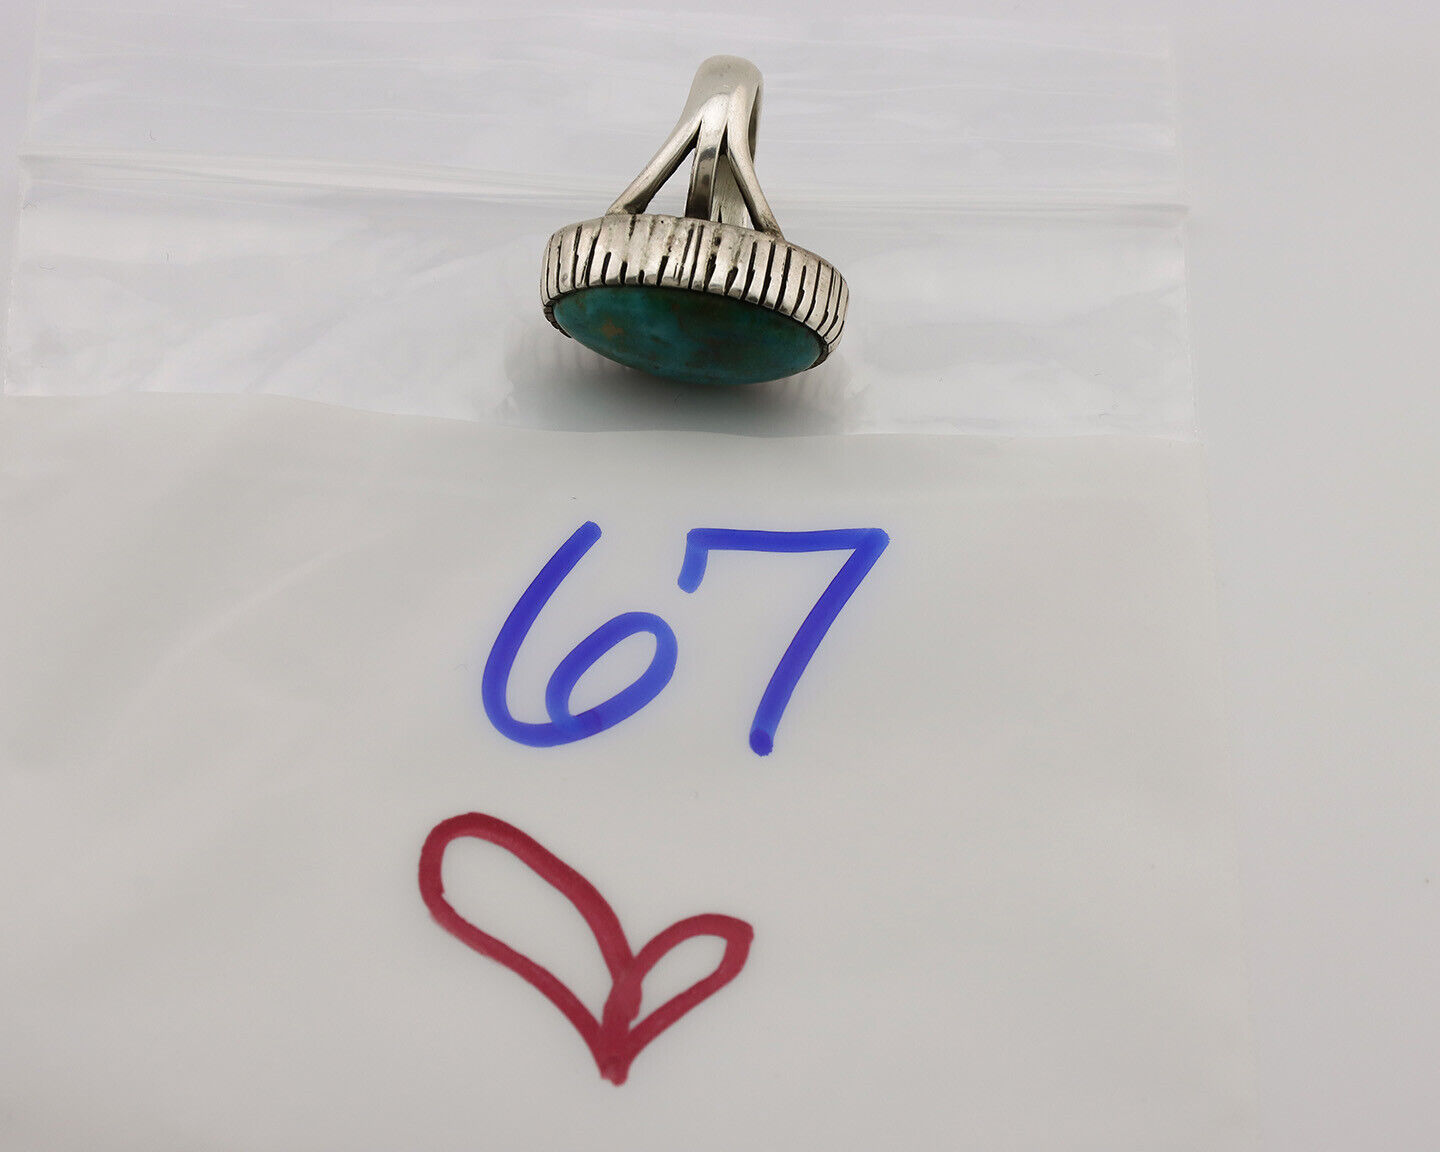 Navajo Ring .925 Silver Natural Blue Turquoise Native American Artist Signed C80